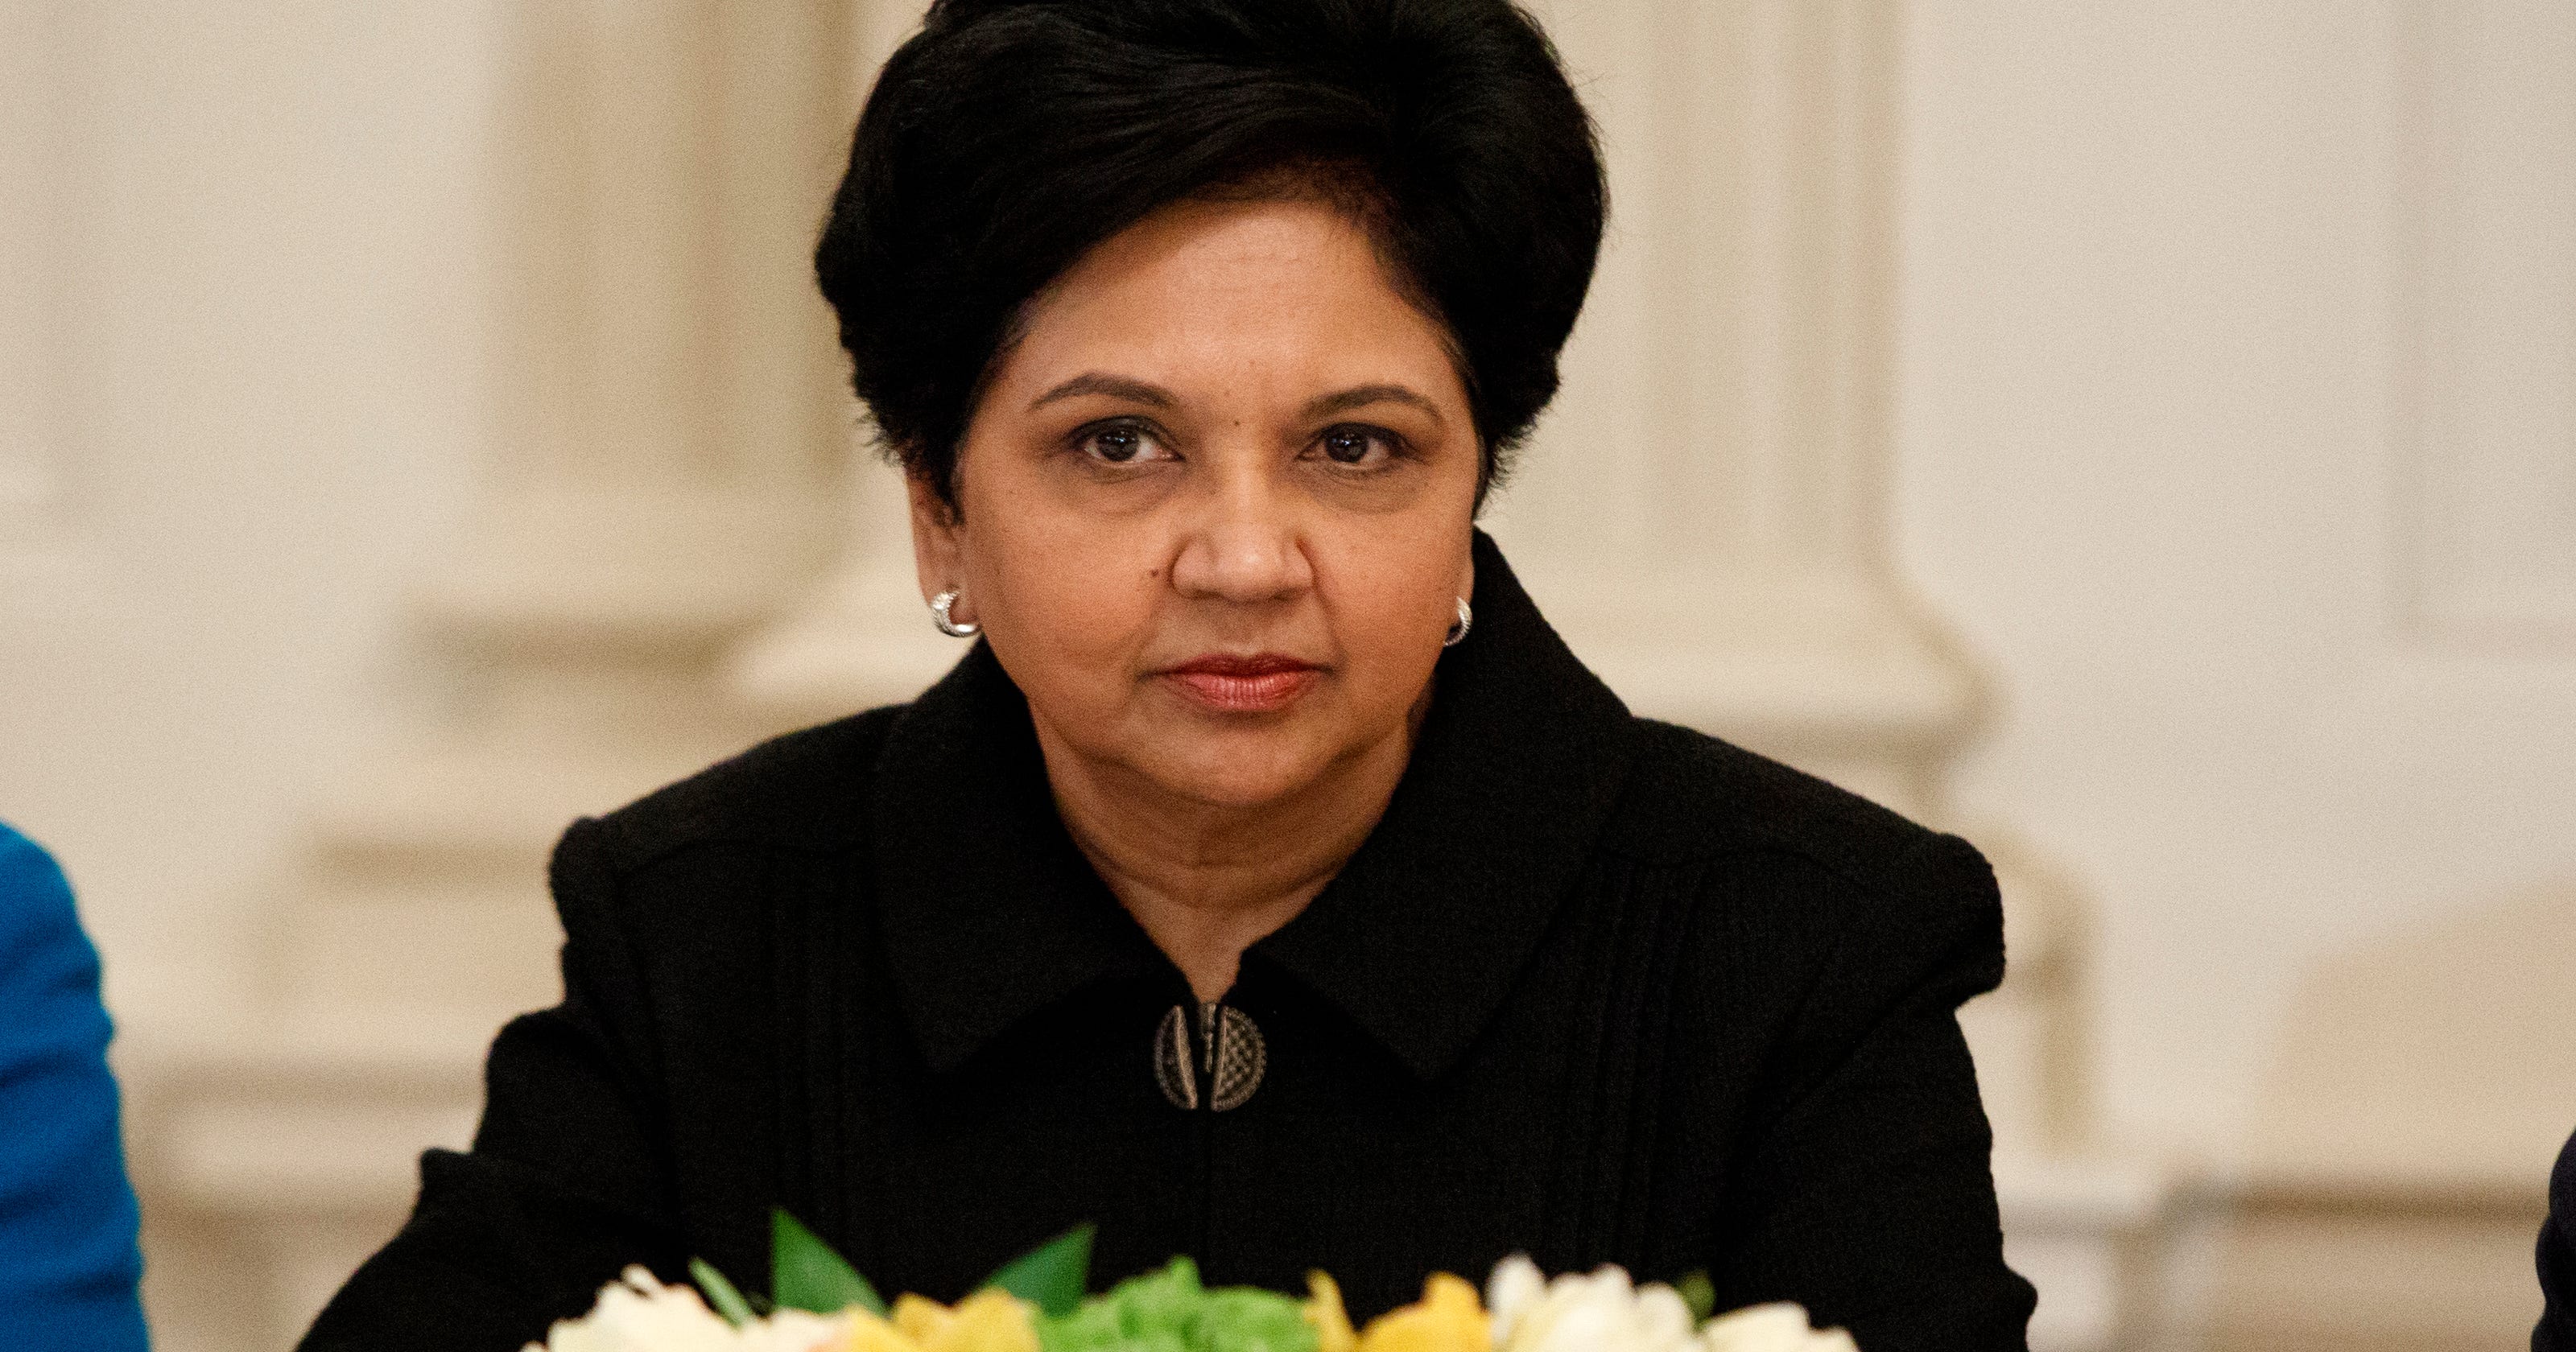 Indra Nooyi, PepsiCo CEO, to step down after 12 years